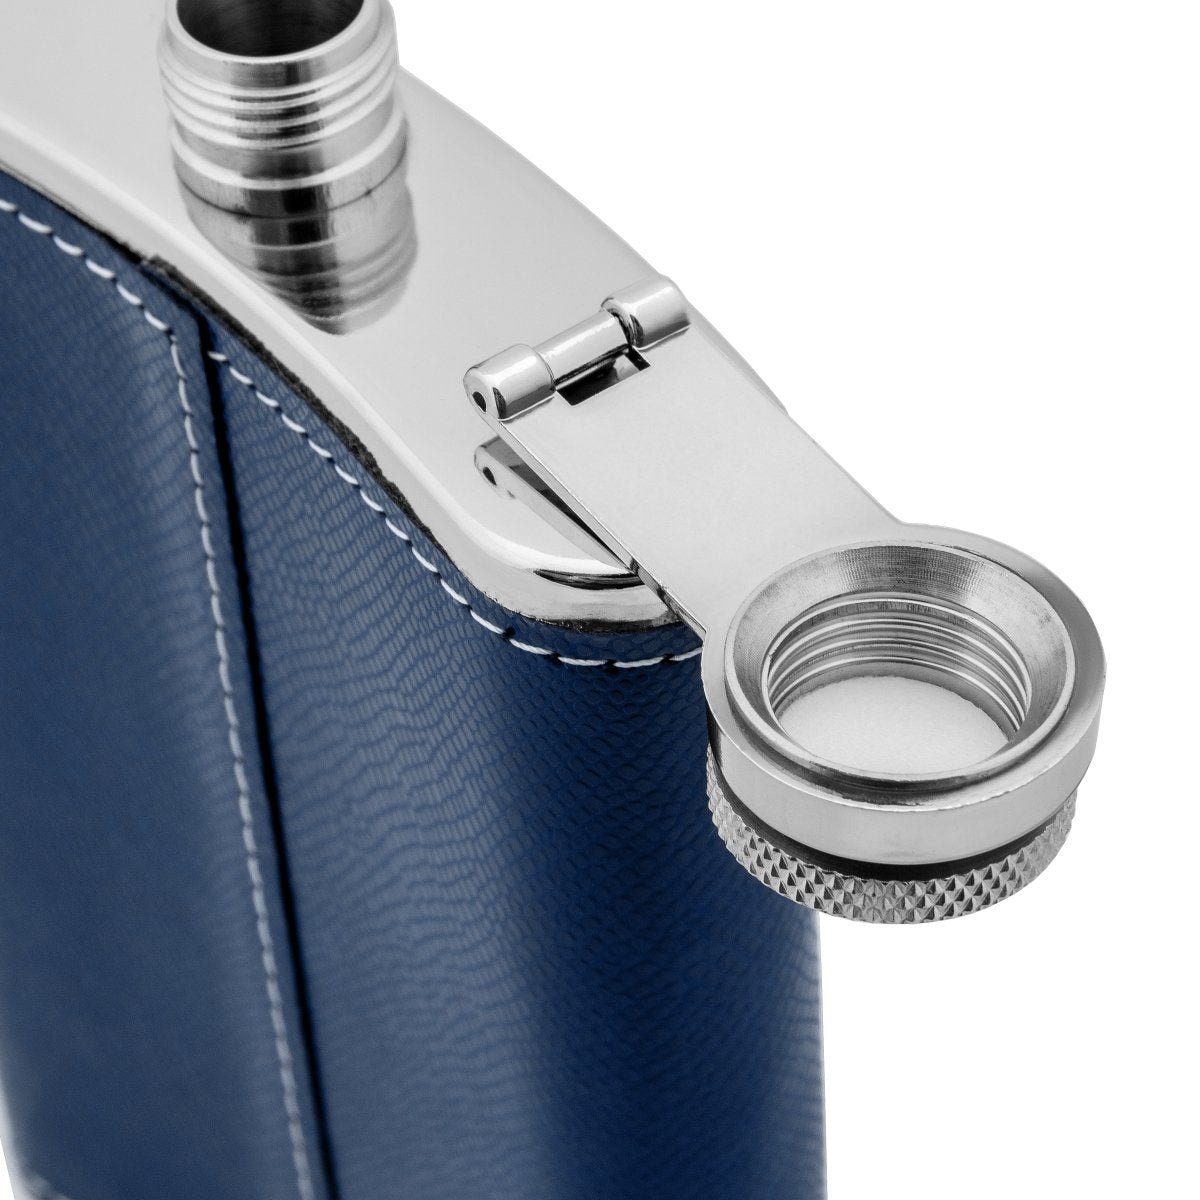 9 oz Blue Stainless Steel Hip Flask for Strong Alcohol